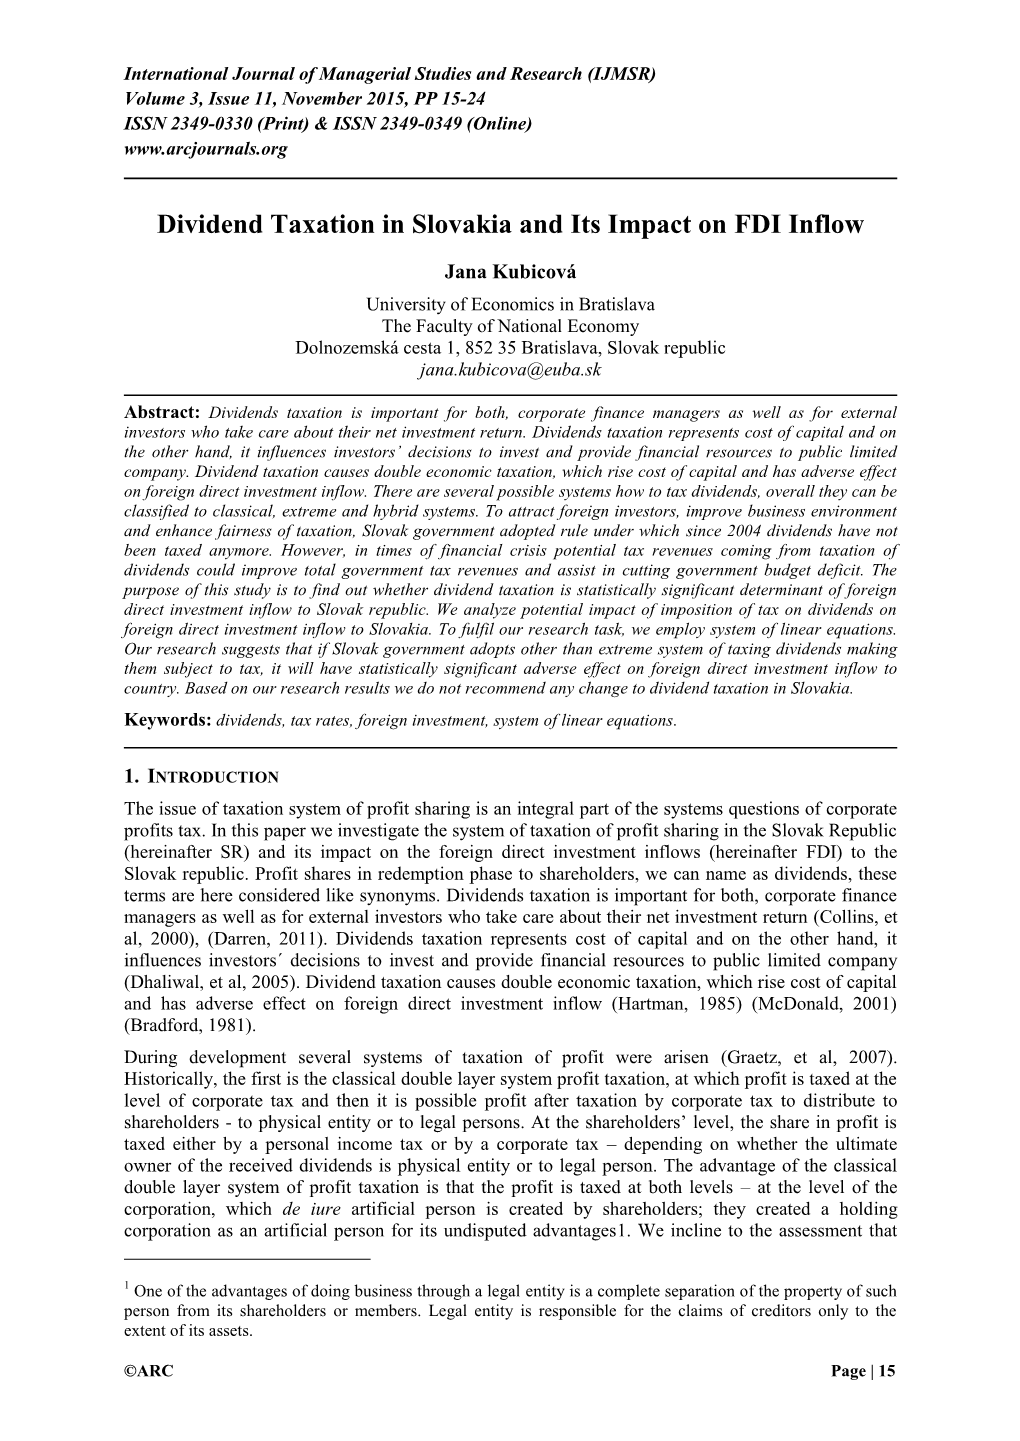 Dividend Taxation in Slovakia and Its Impact on FDI Inflow